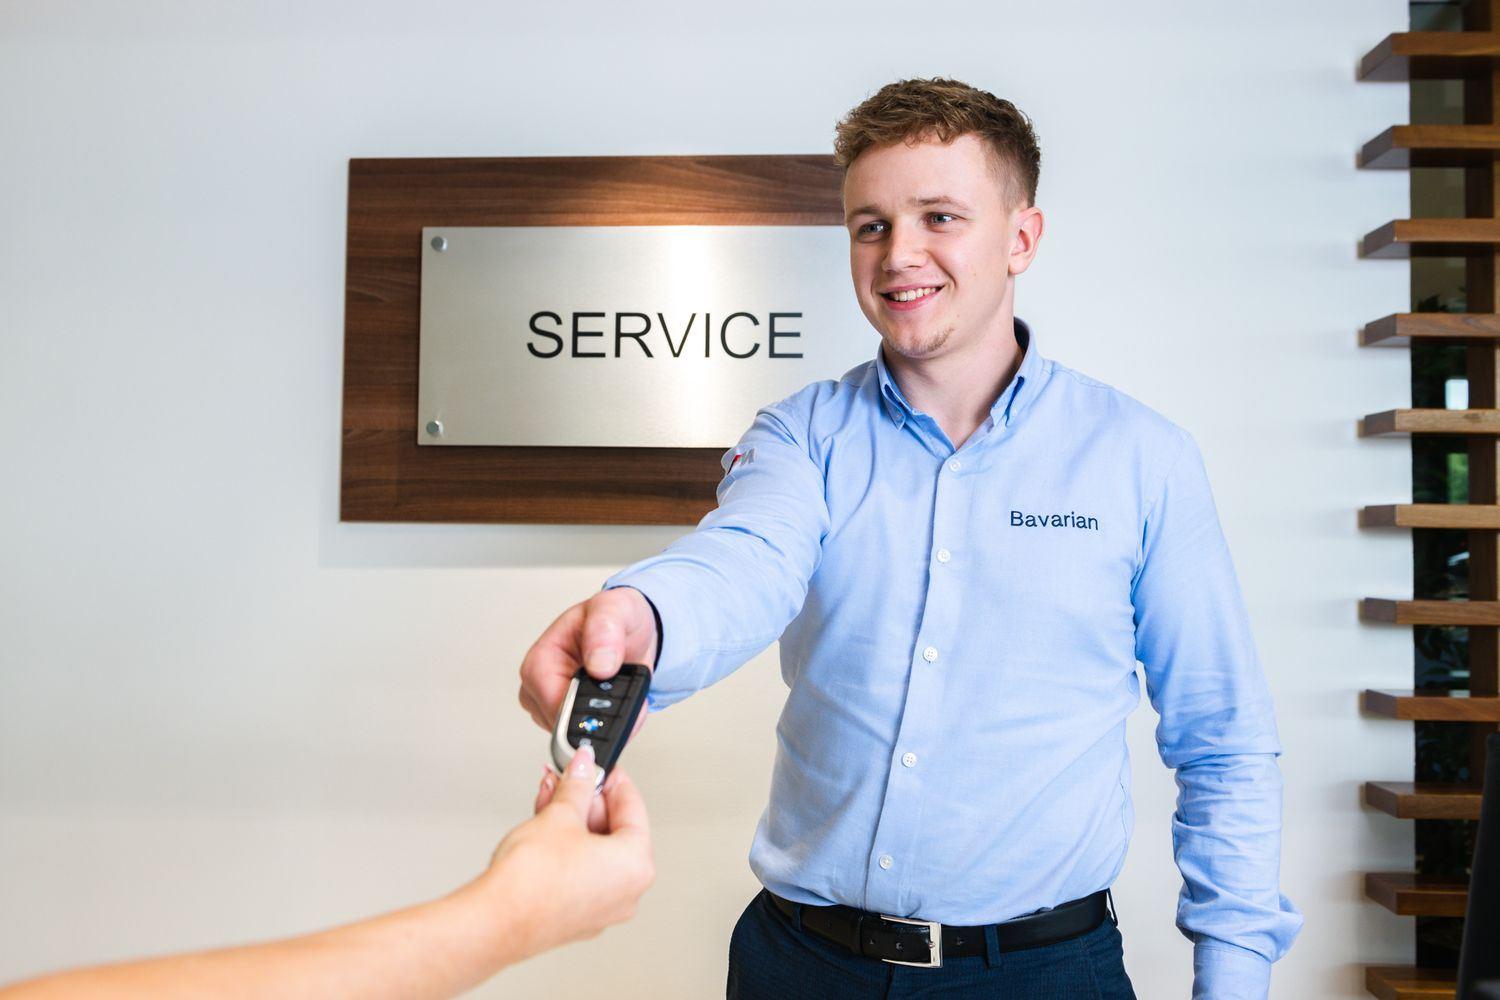 Bavarian Service Specialist hands over keys to customer at the Bavarian BMW Service area after successful service